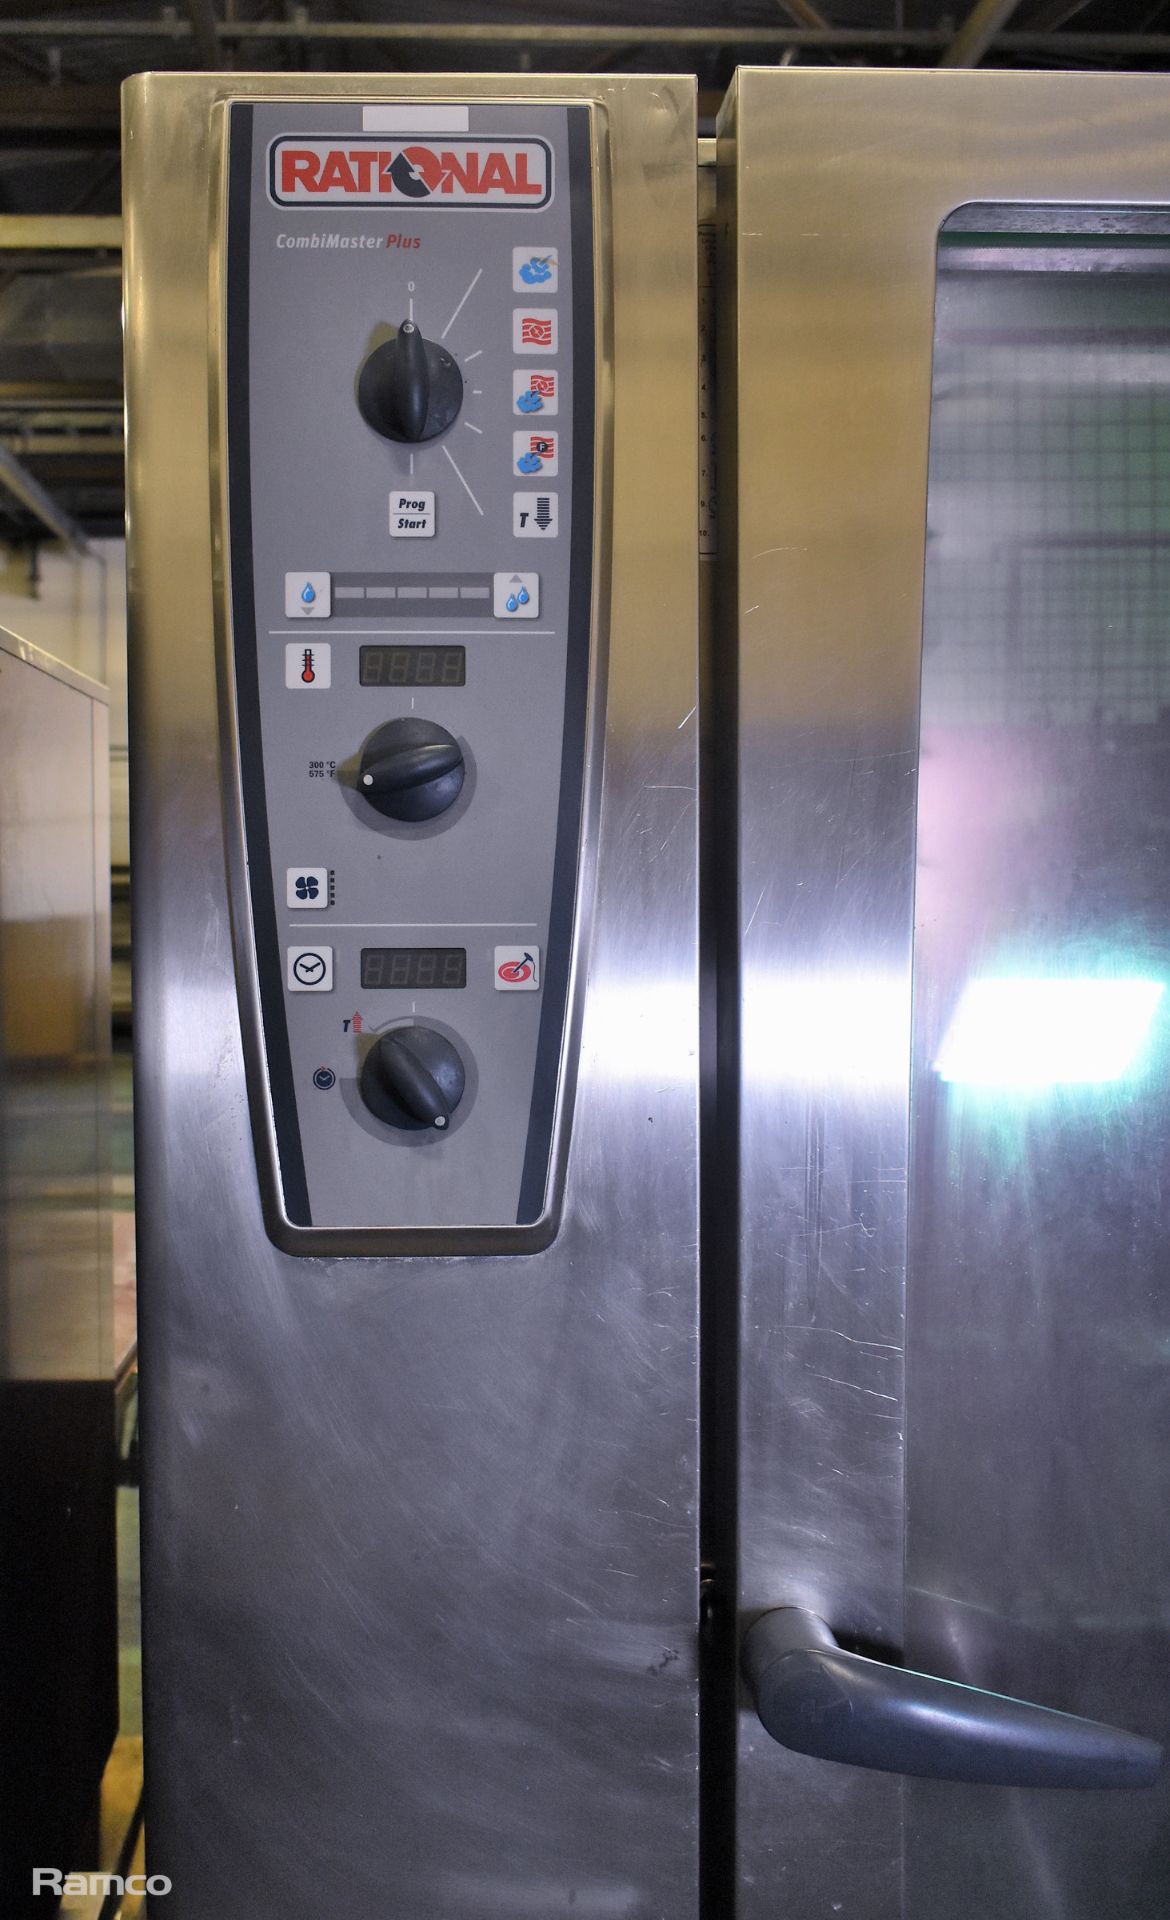 Rational CombiMaster Plus CMP 201G stainless steel 20 grid combi oven - W 880 x D 1000 x H 1850mm - Image 6 of 8